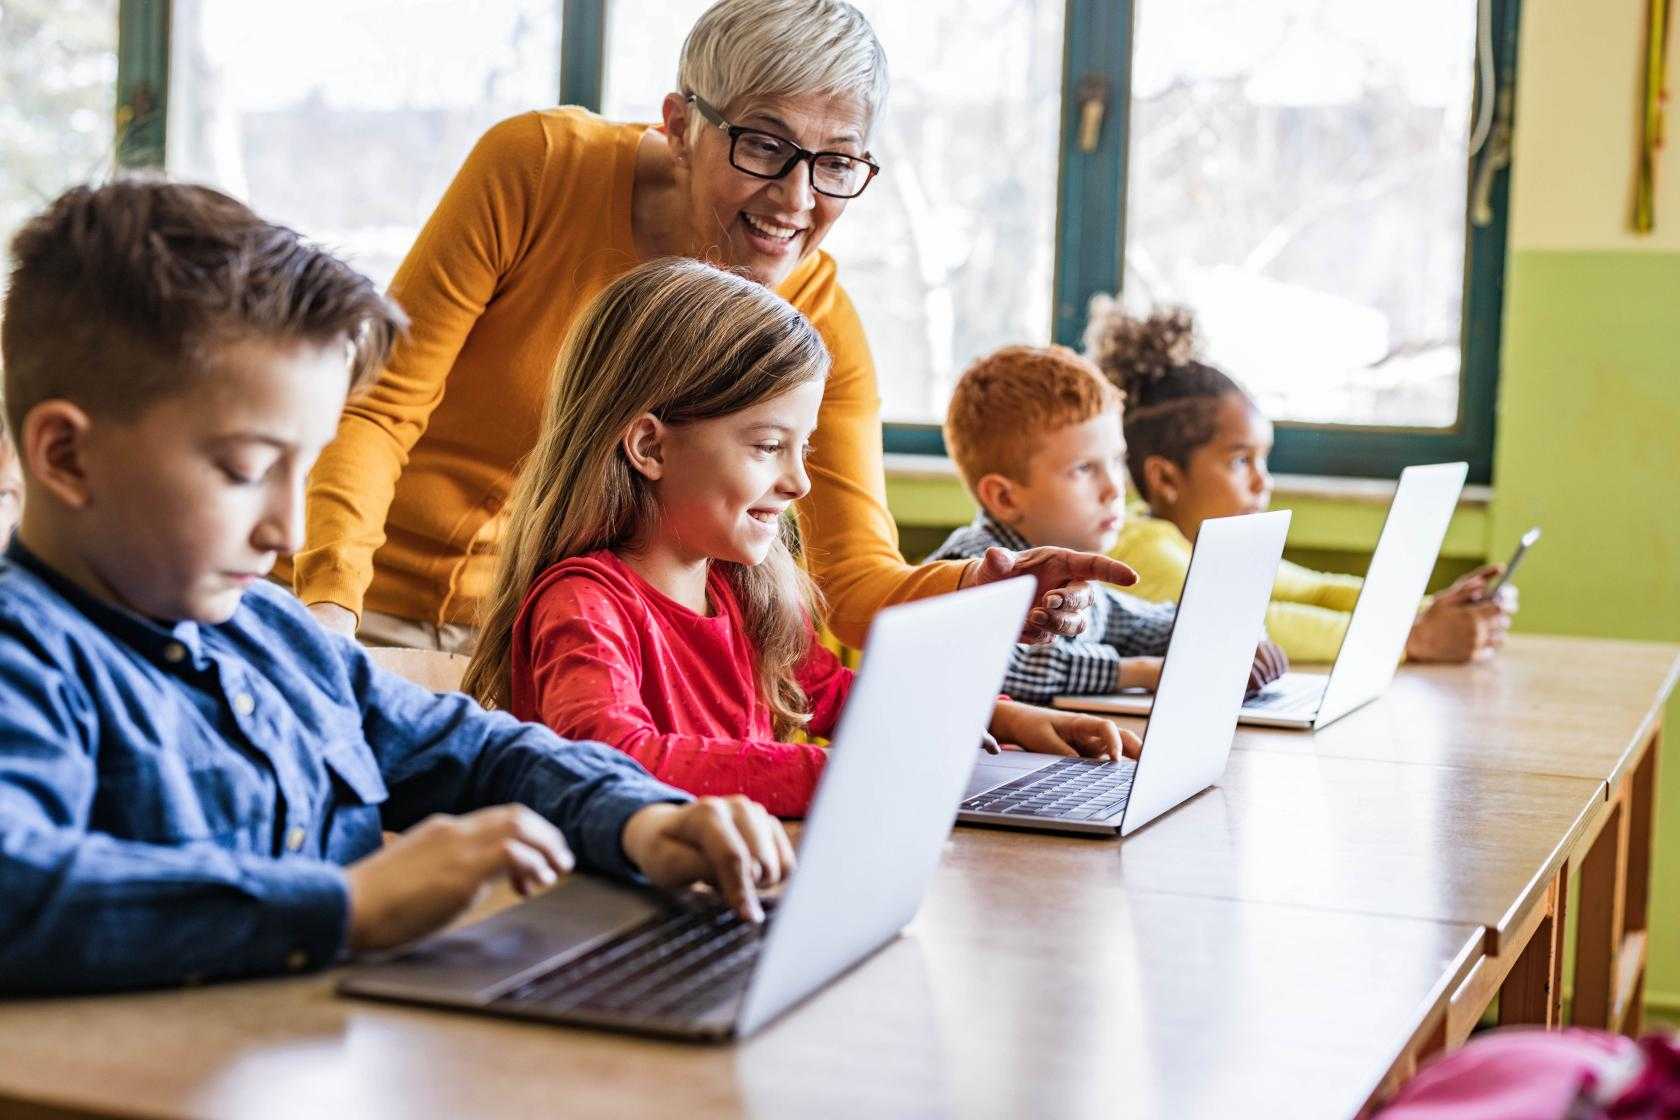 Group of kids on laptops with adult women